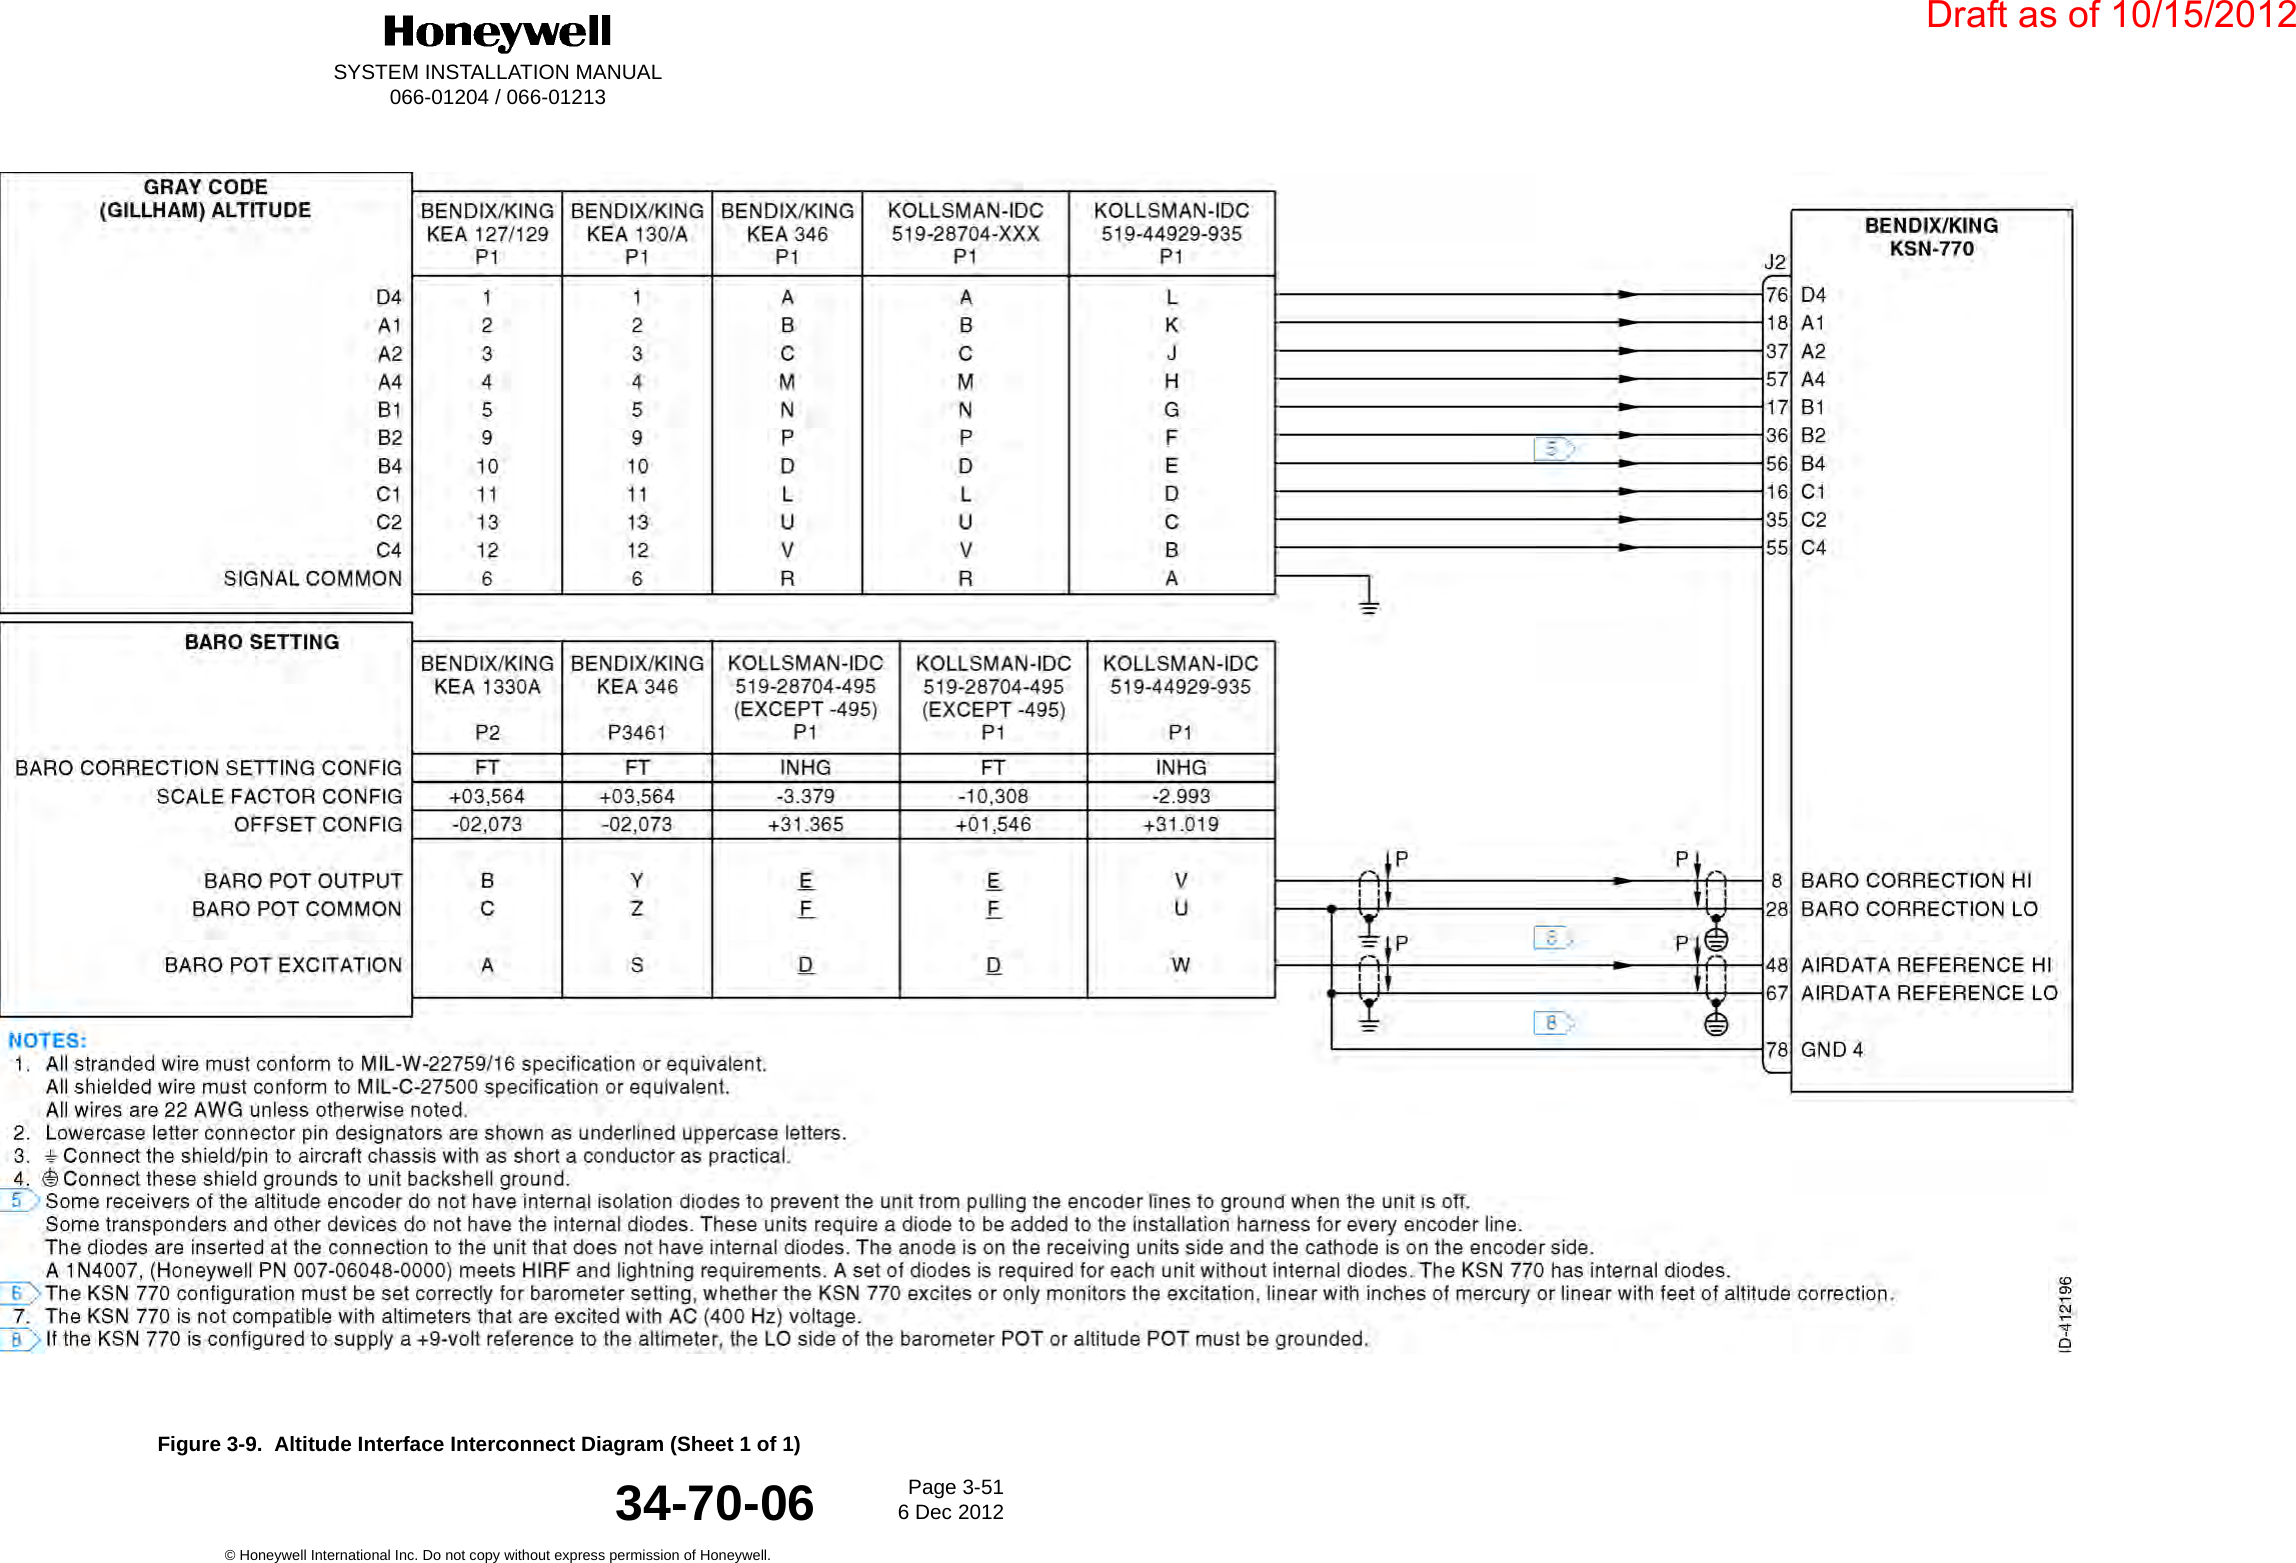 DraftSYSTEM INSTALLATION MANUAL066-01204 / 066-01213Page 3-516 Dec 2012© Honeywell International Inc. Do not copy without express permission of Honeywell.34-70-06Figure 3-9.  Altitude Interface Interconnect Diagram (Sheet 1 of 1)Draft as of 10/15/2012